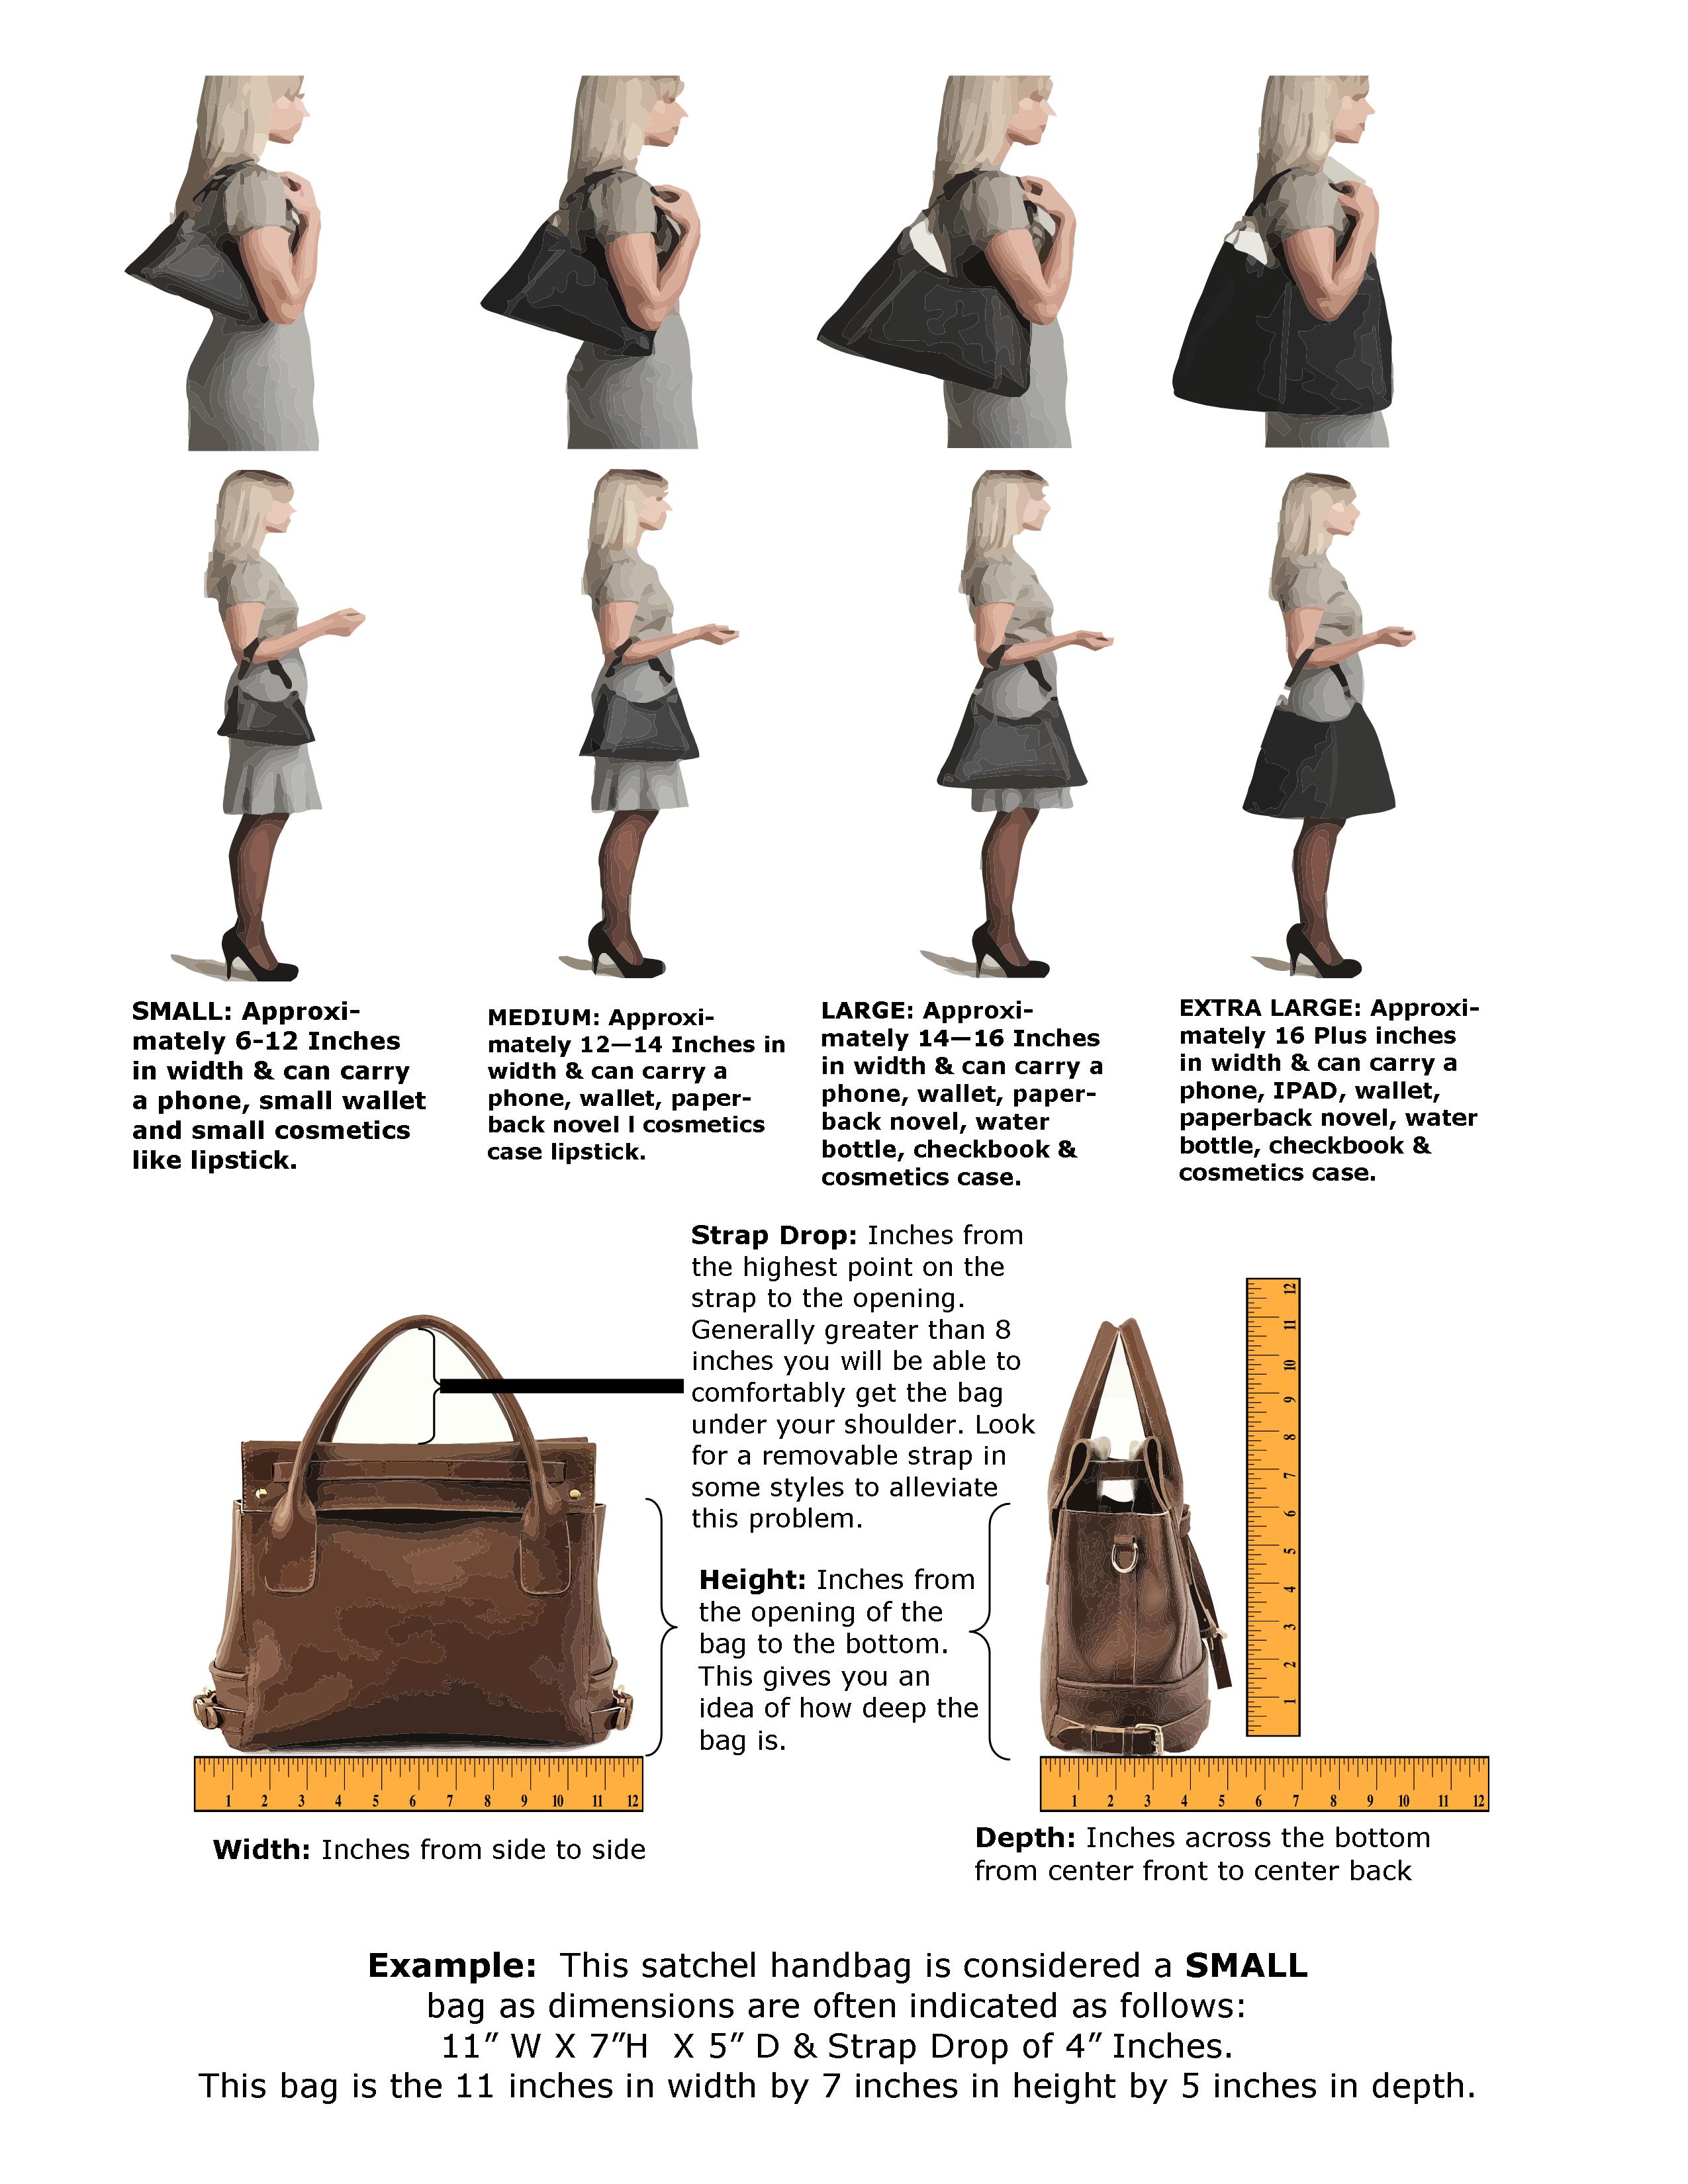 Anatomy of a Handbag Part 2 Glamour for the everyday woman